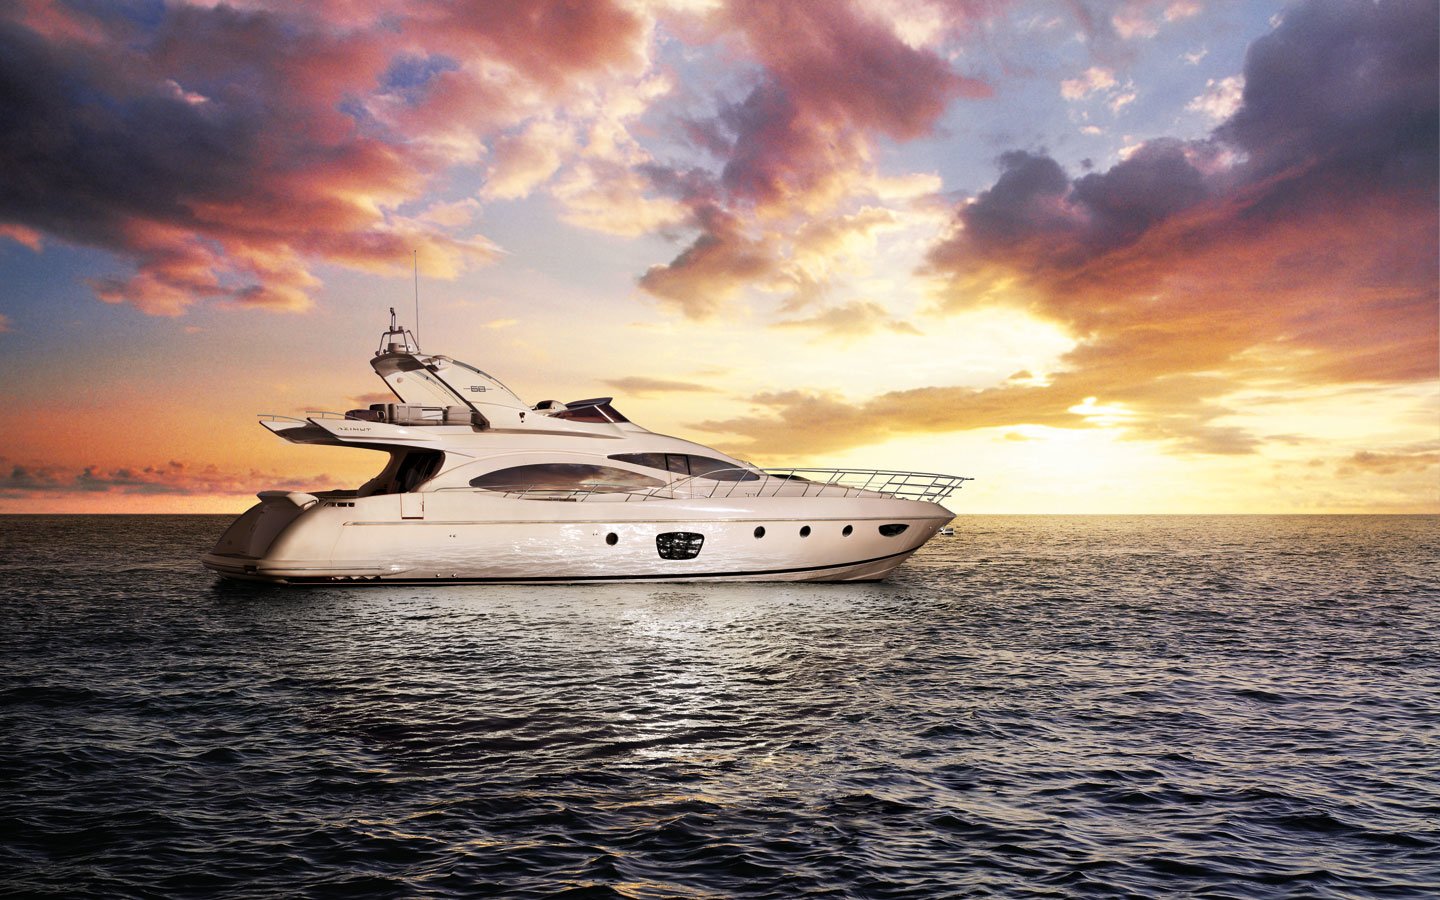 Yacht HD Wallpaper Background Image